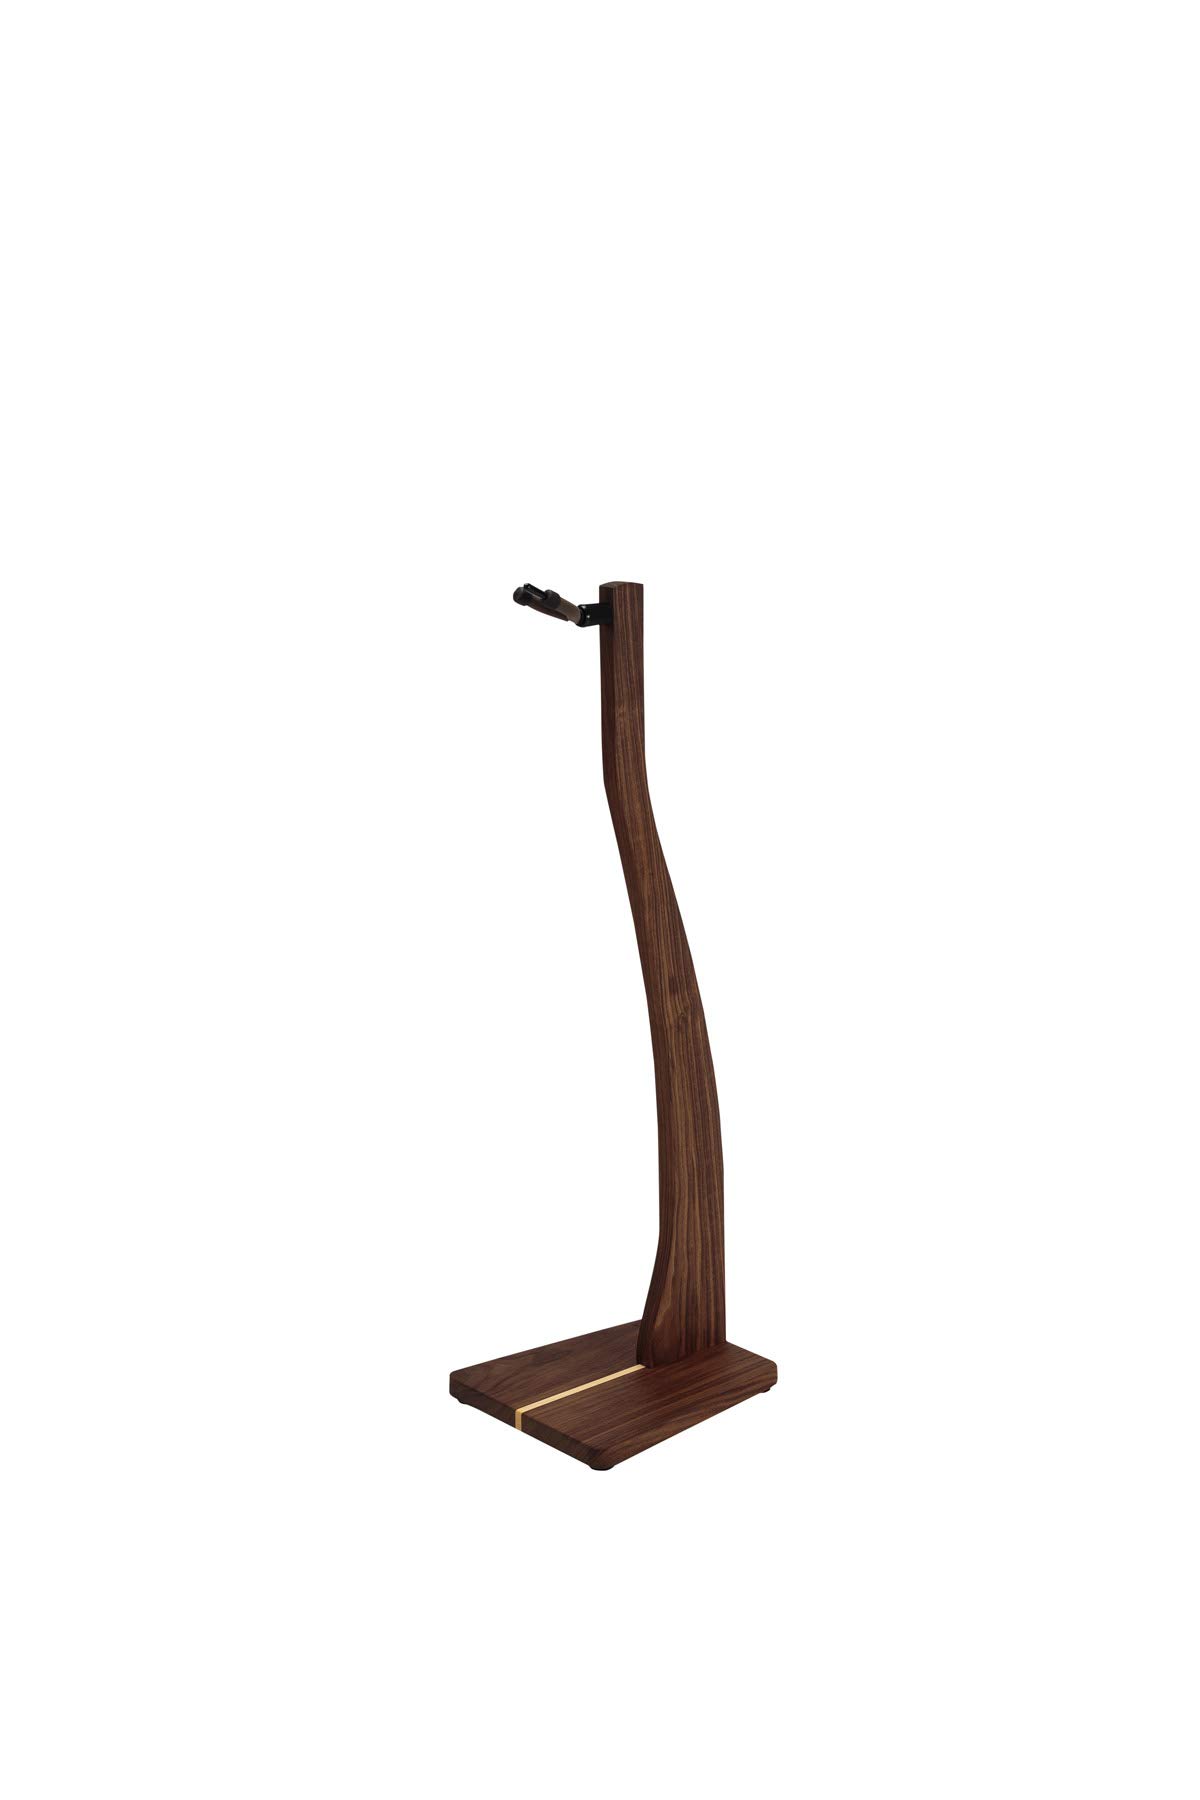 Zither USA Zither Wooden Violin Or Viola Stand - Handcrafted Solid Walnut Wood Floor Stands, Made In Usa